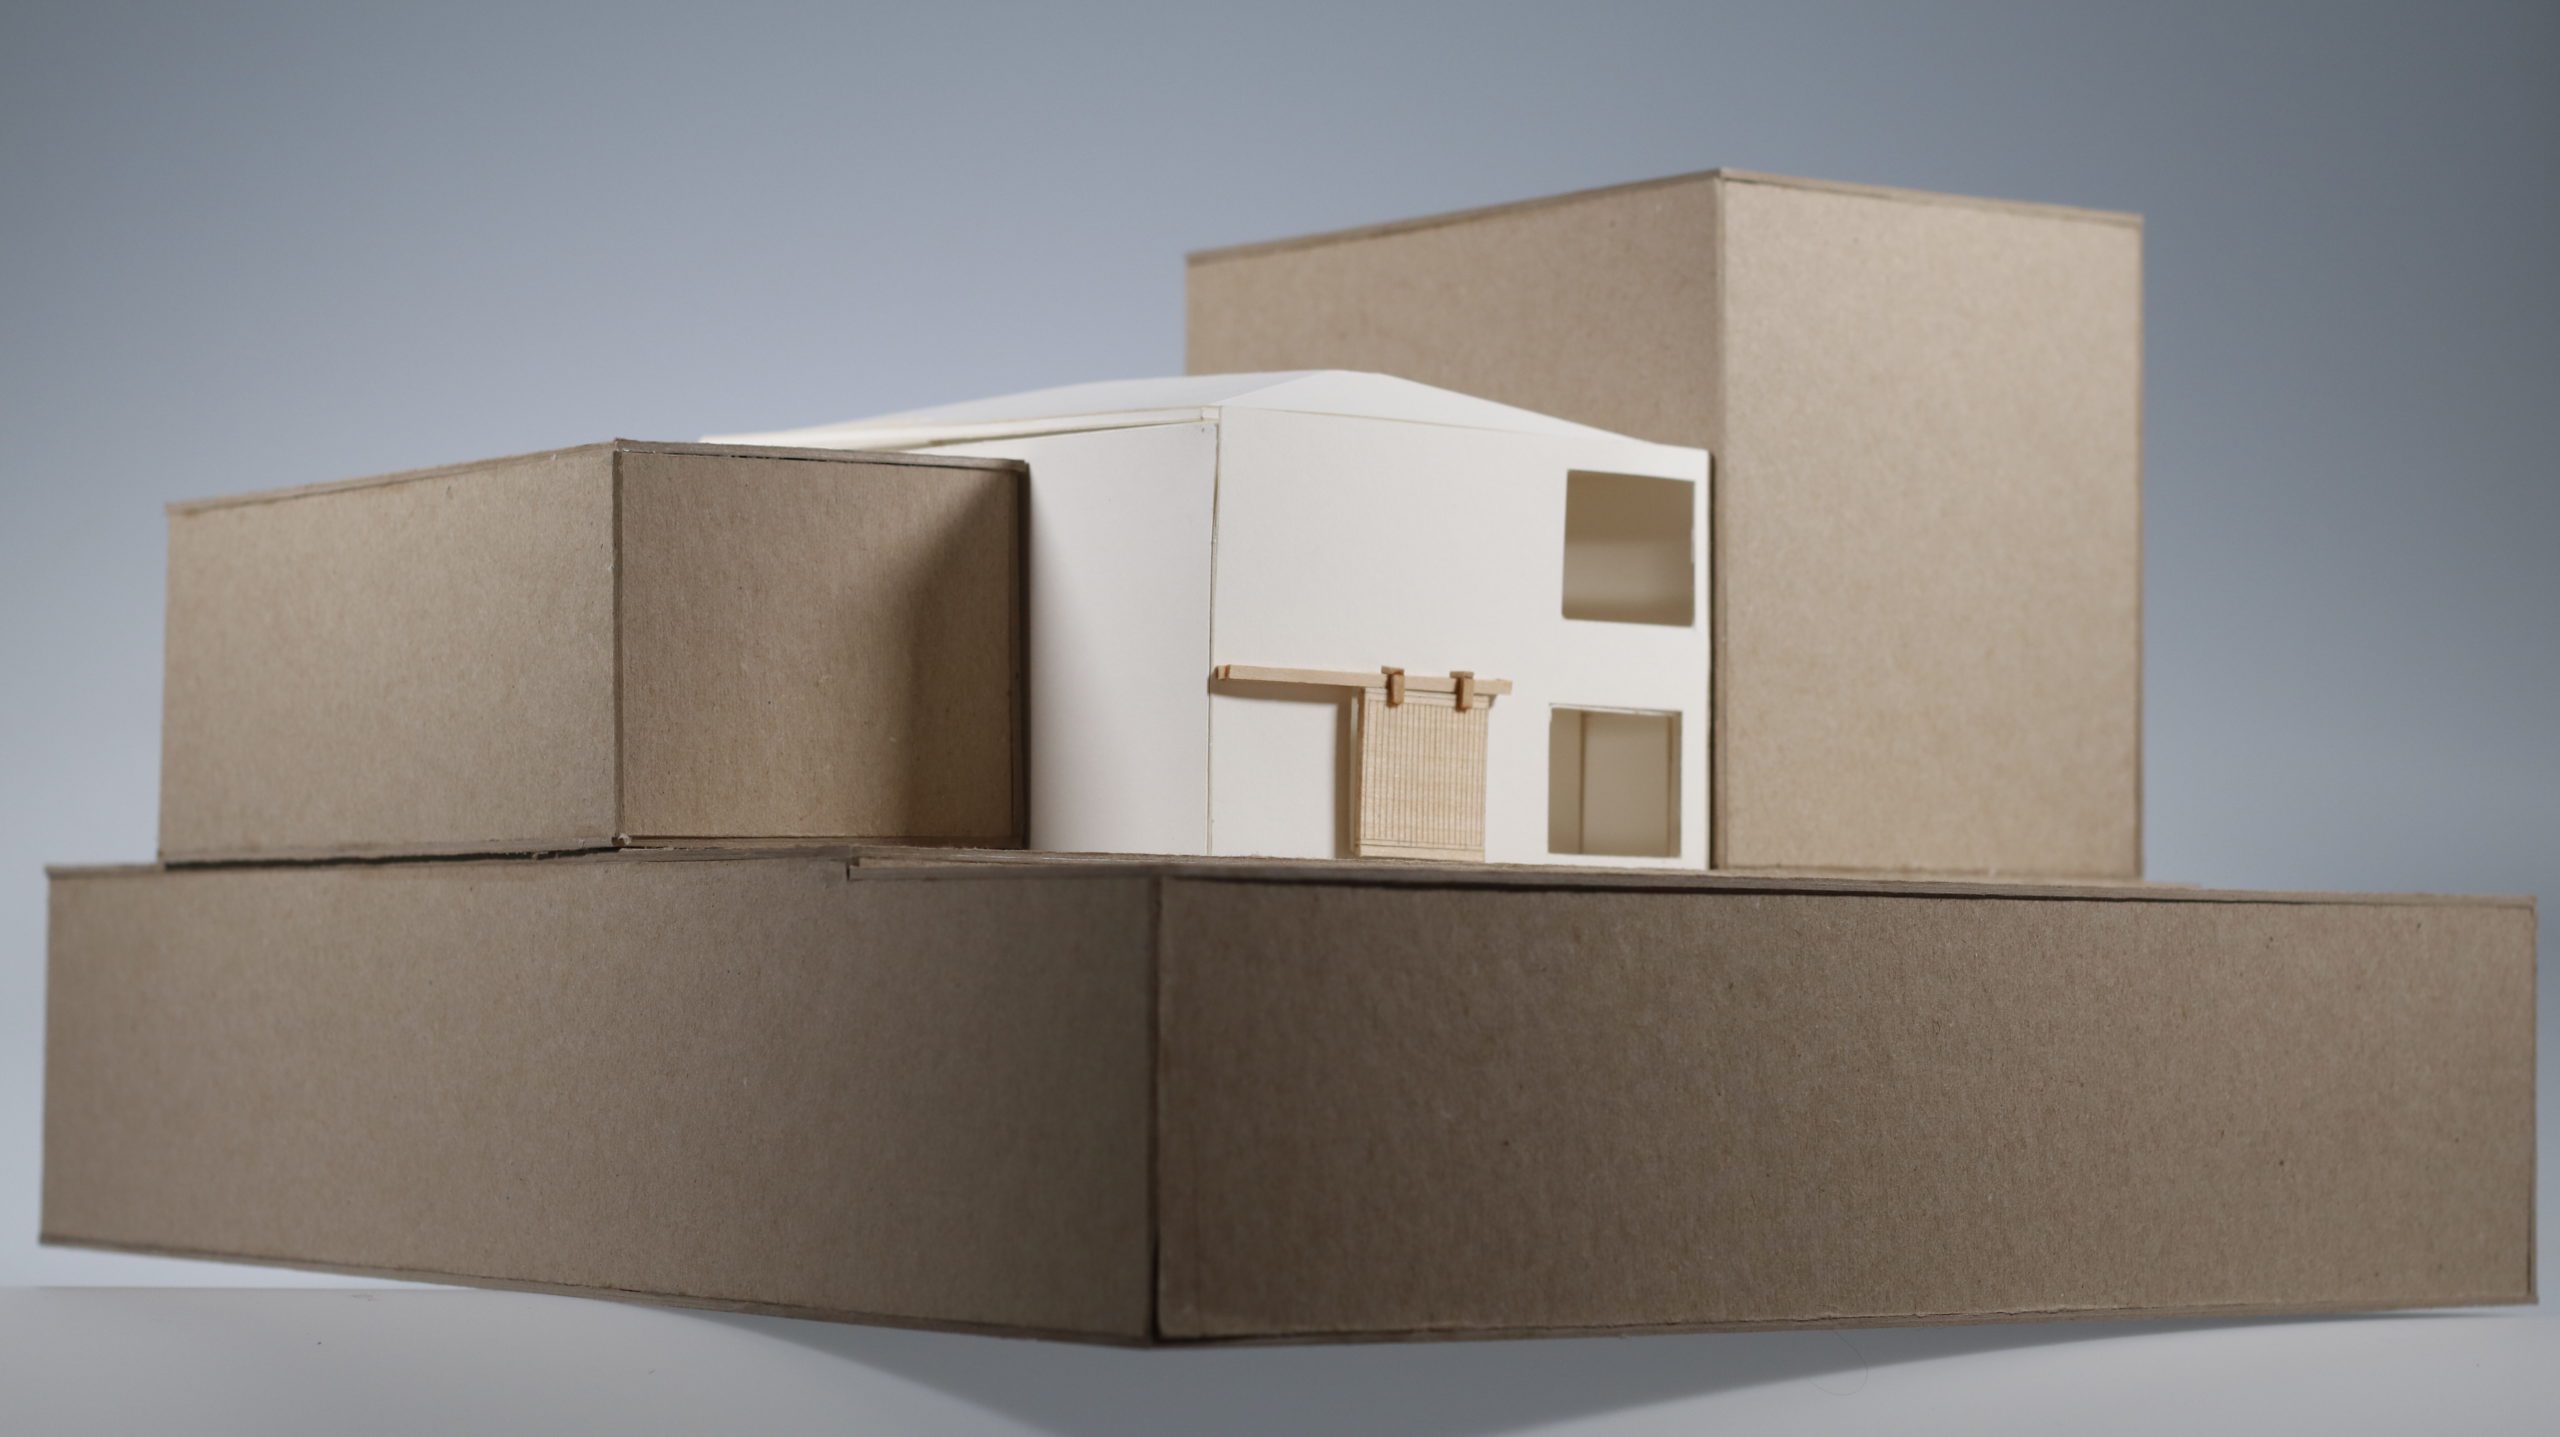 Exterior of architecture model with sliding barn door